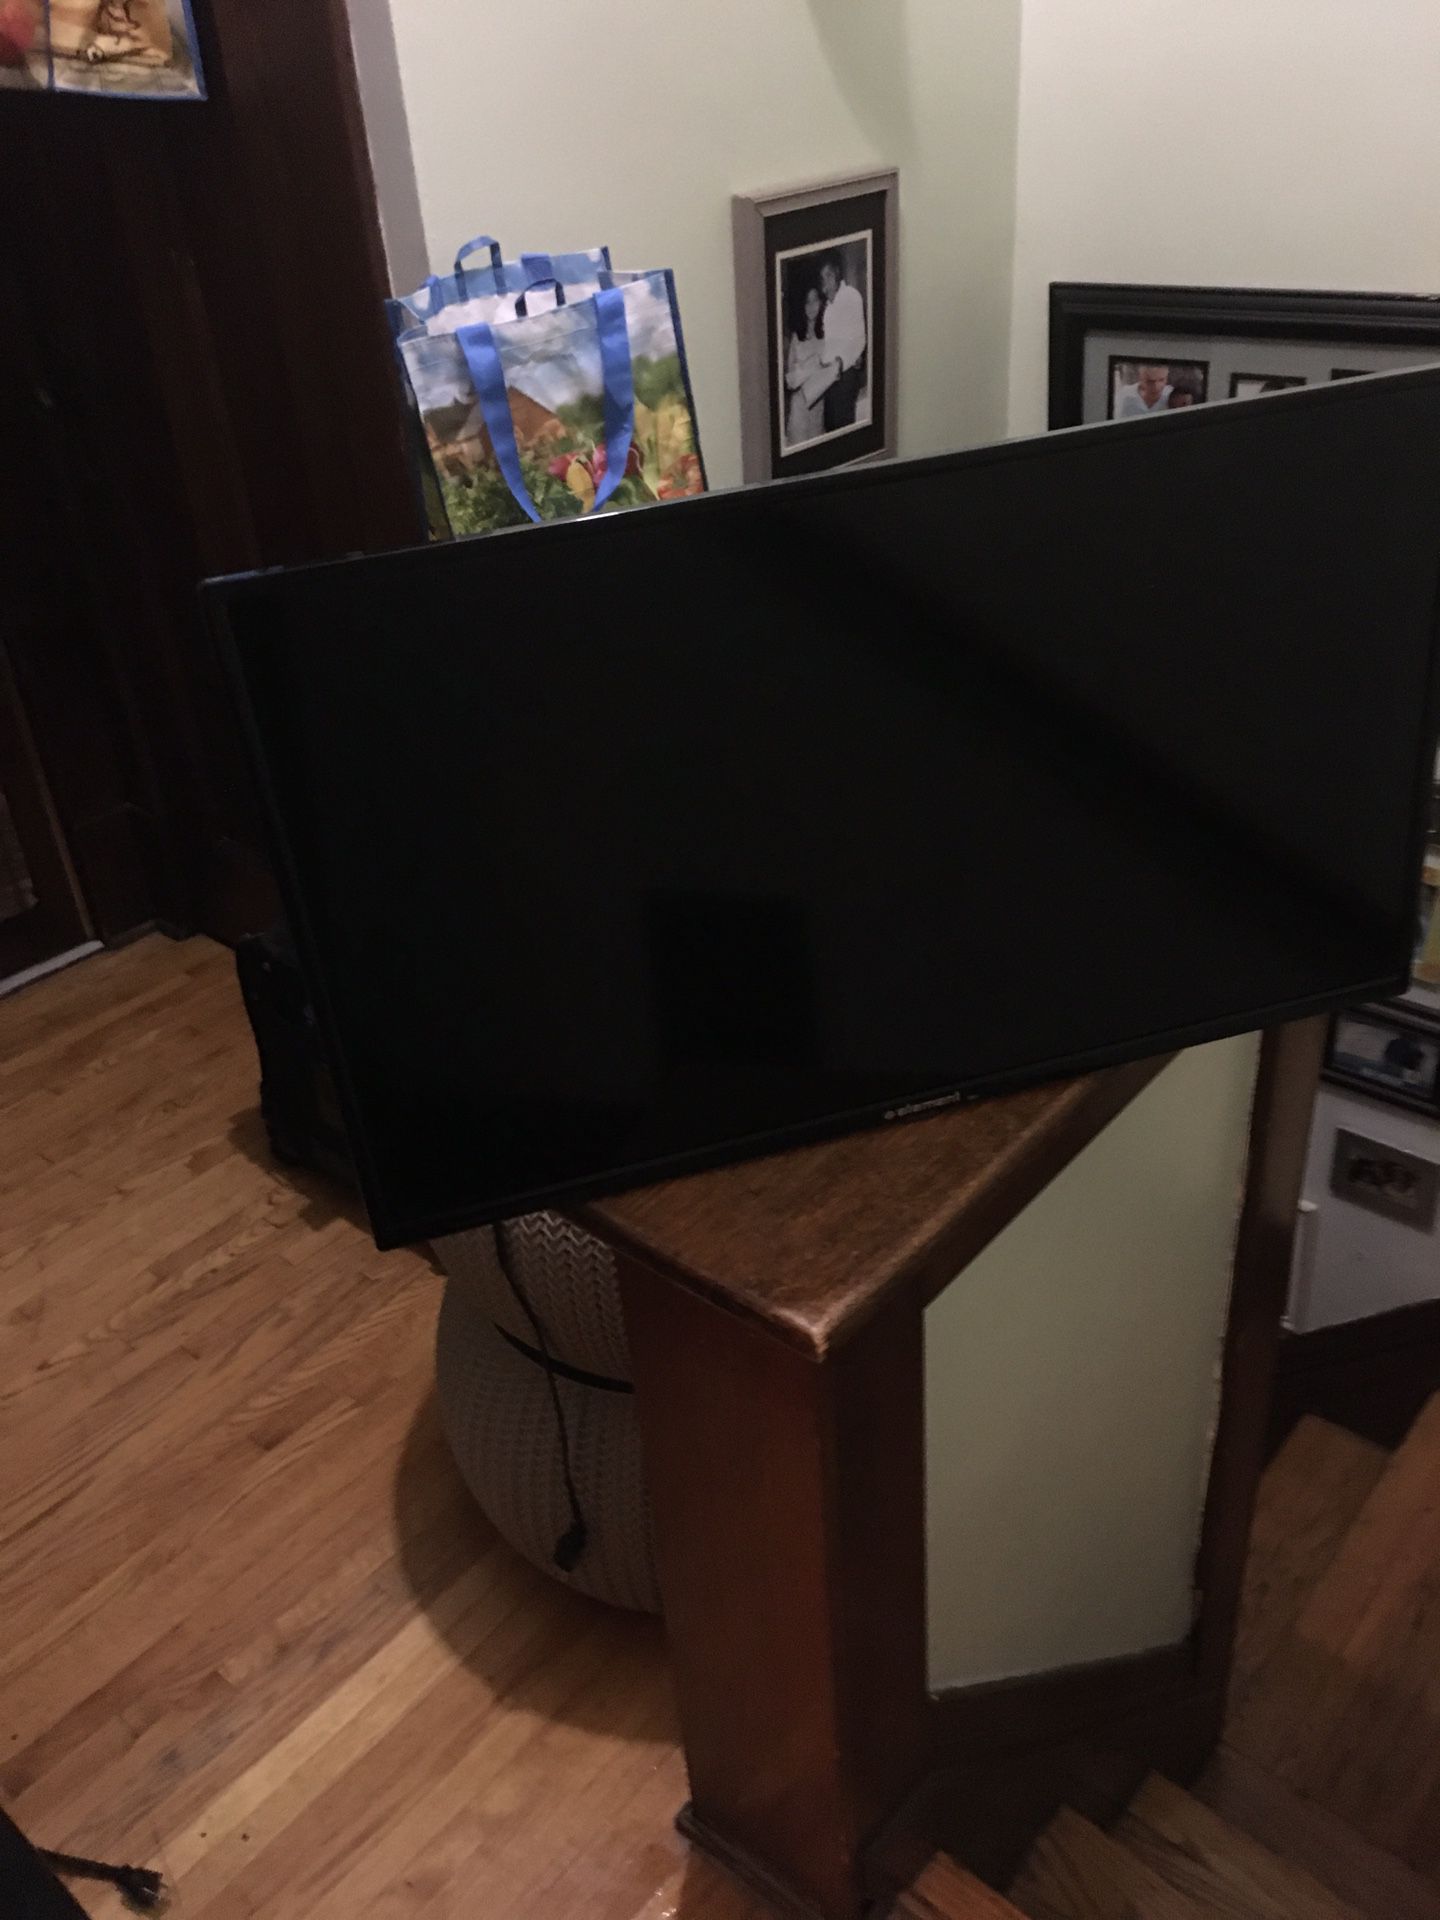 32” Tv Beautiful Color Works Excellent Priced For Quick Sale.